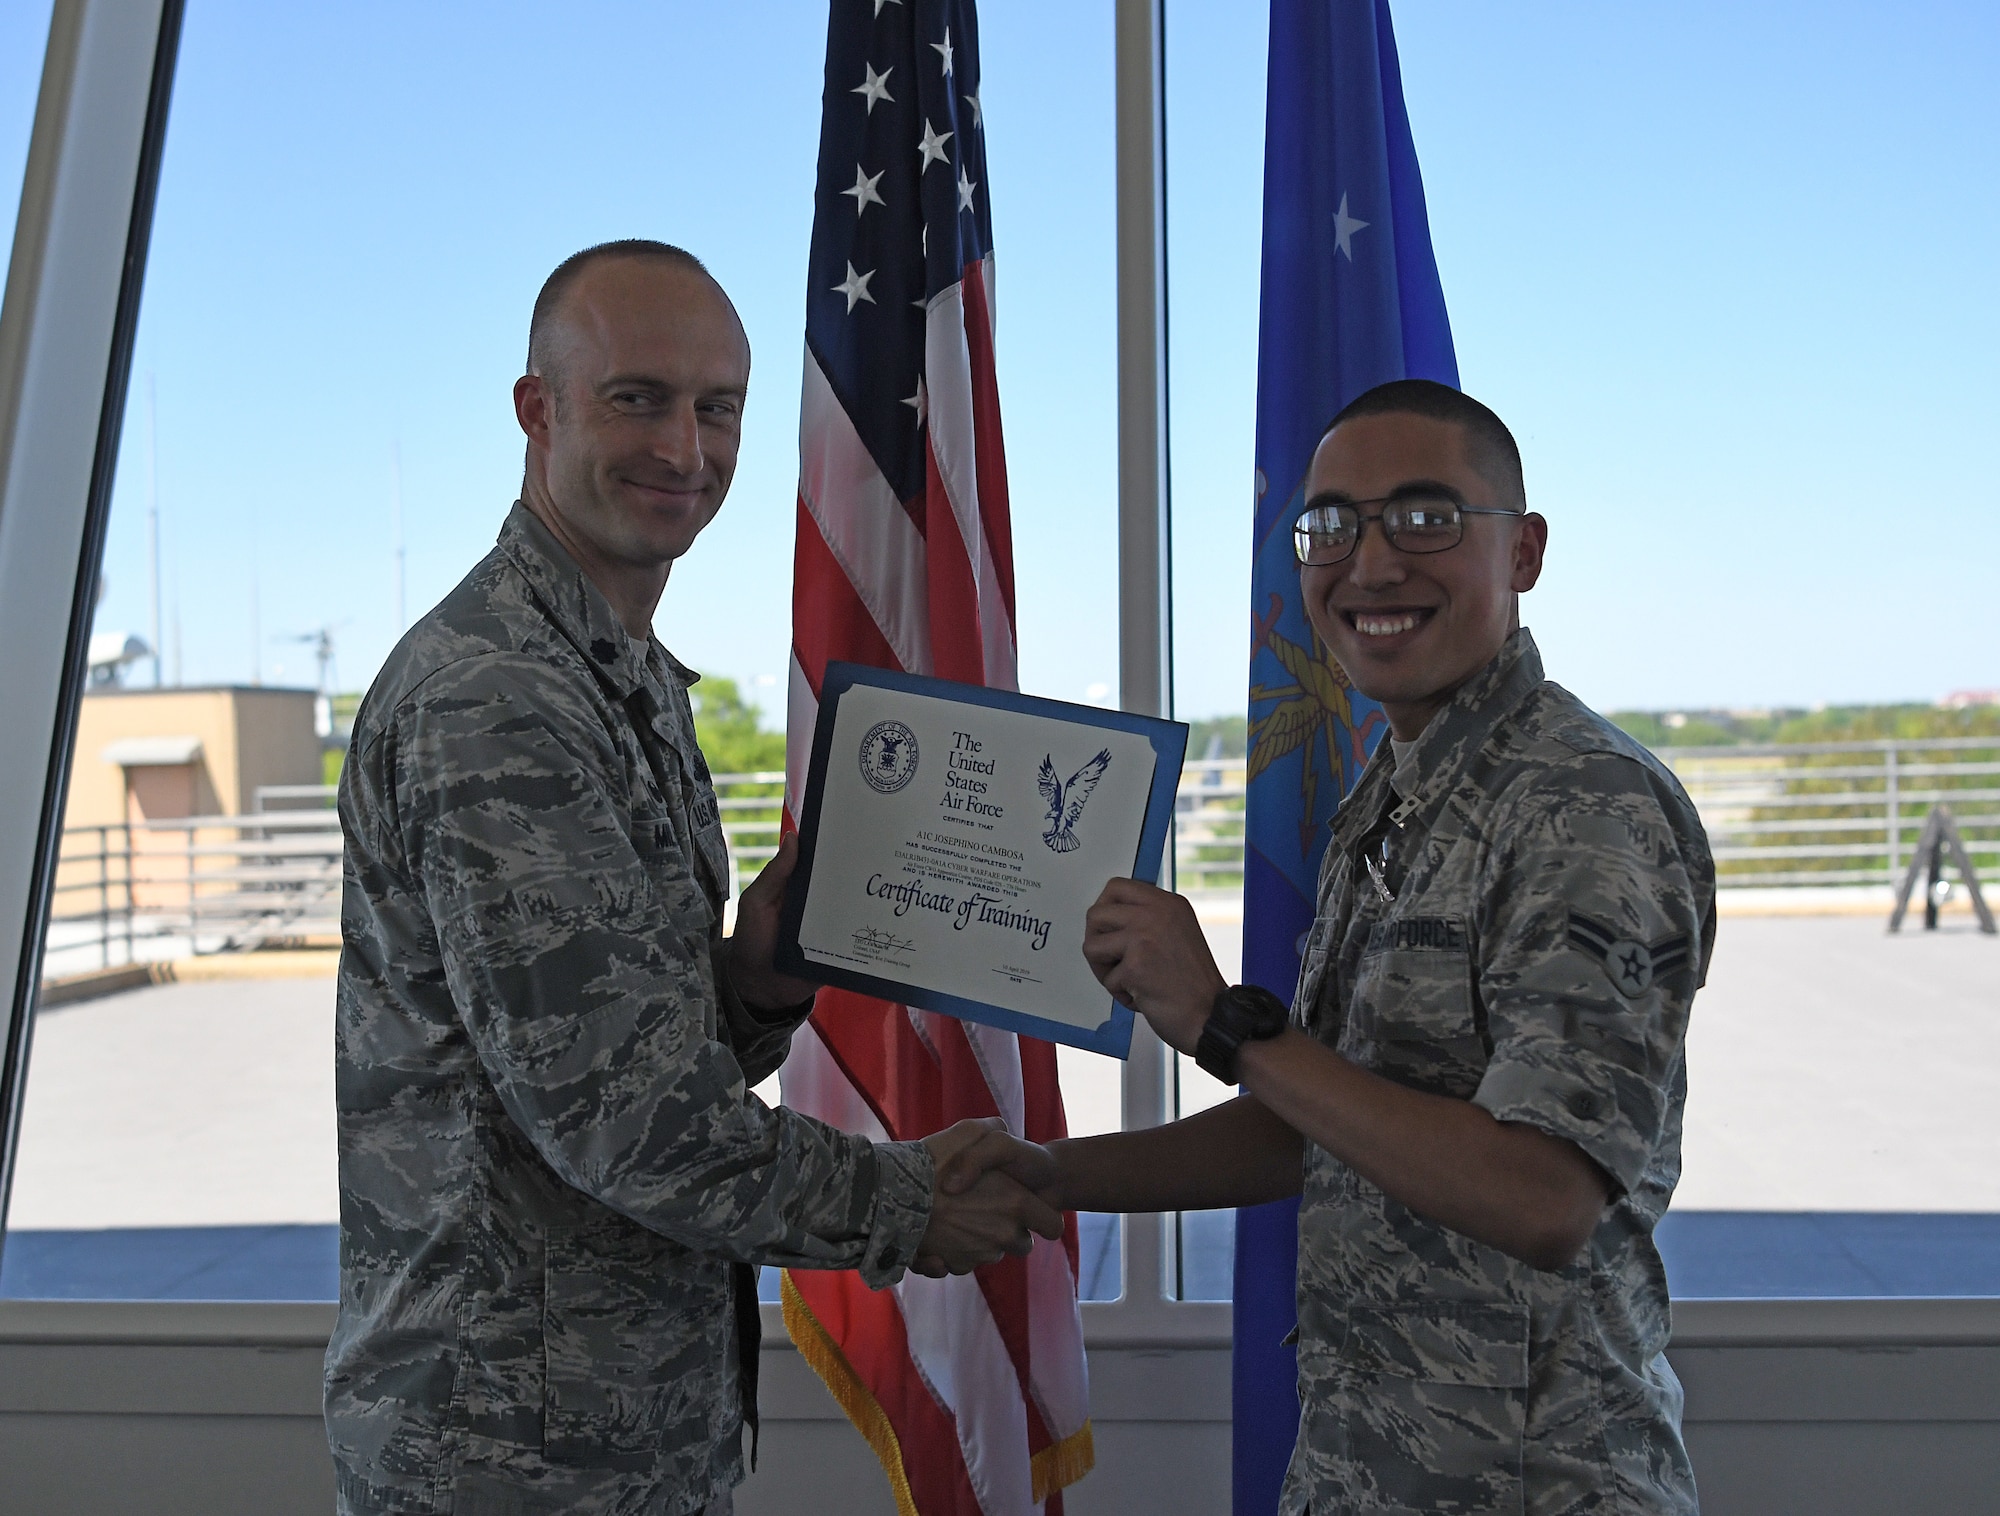 Lt. Col. Andrew Miller, 333rd Training Squadron commander, awards Airman 1st Class Josephino Cambosa, 333rd TRS student, a certificate of training for completing the Cyber Warfare Operations course on Keesler Air Force Base, Mississippi, April 10, 2019. Cambosa is the first non-prior service Airman to graduate from the Cyber Warfare Operations school house. (U.S. Air Force photo by 2nd Lt. Anh T. Bui)